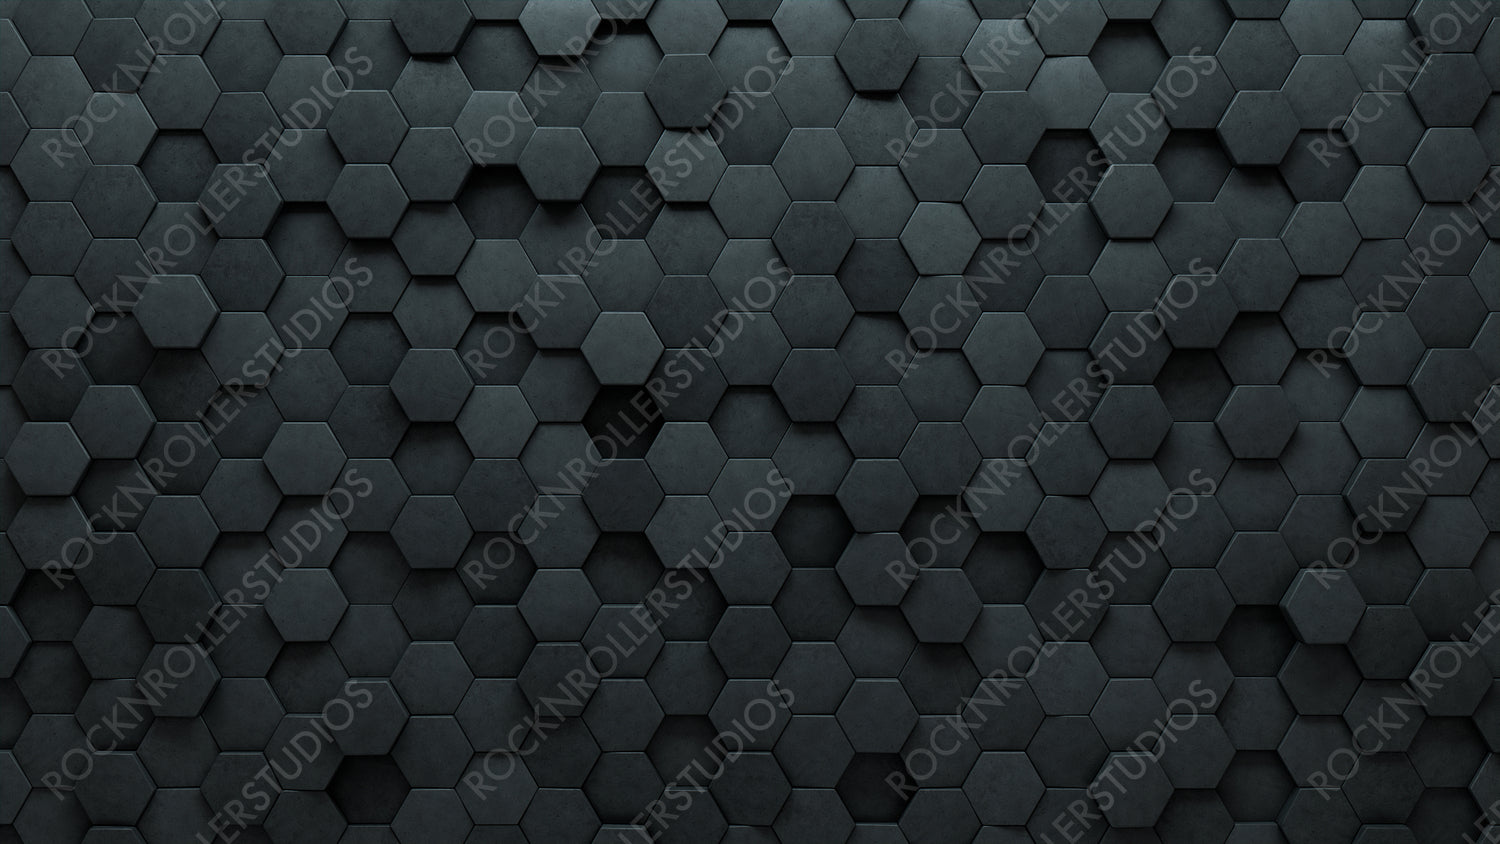 3D, Polished Wall background with tiles. Hexagonal, tile Wallpaper with Futuristic, Concrete blocks. 3D Render